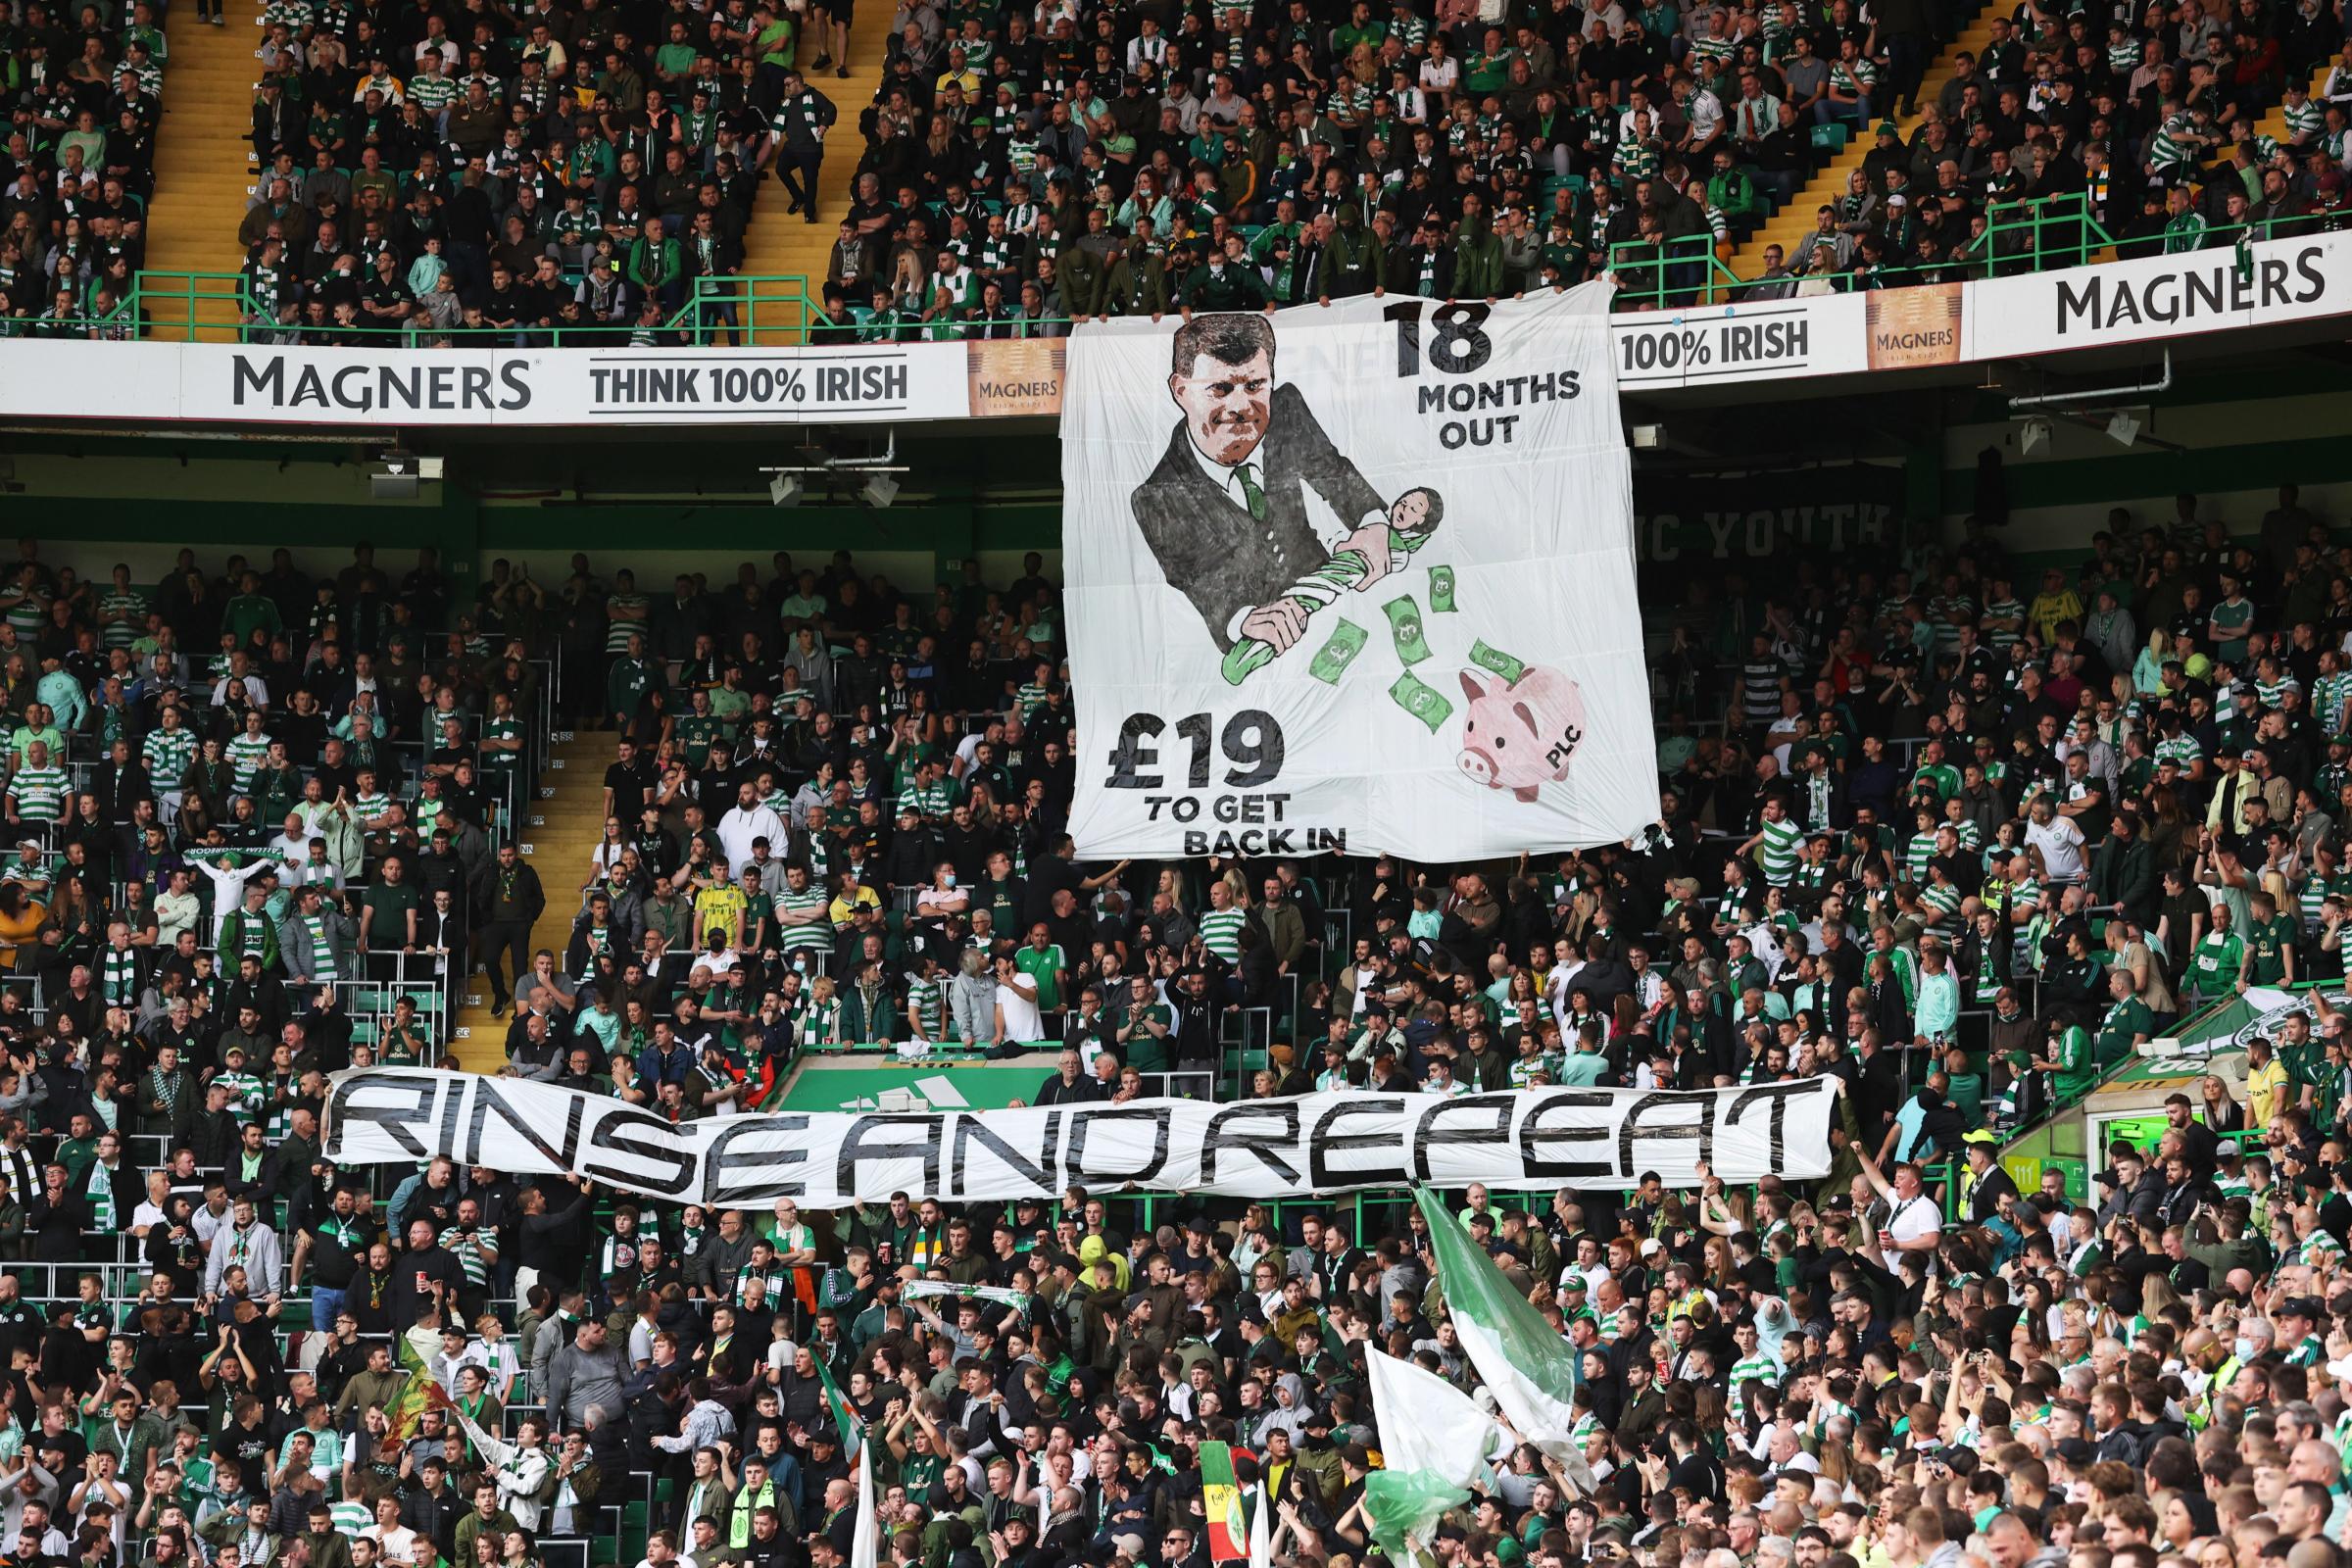 Celtic Way: Celtic fans protest at the club's decision to charge £19 for the FK Jablonec match